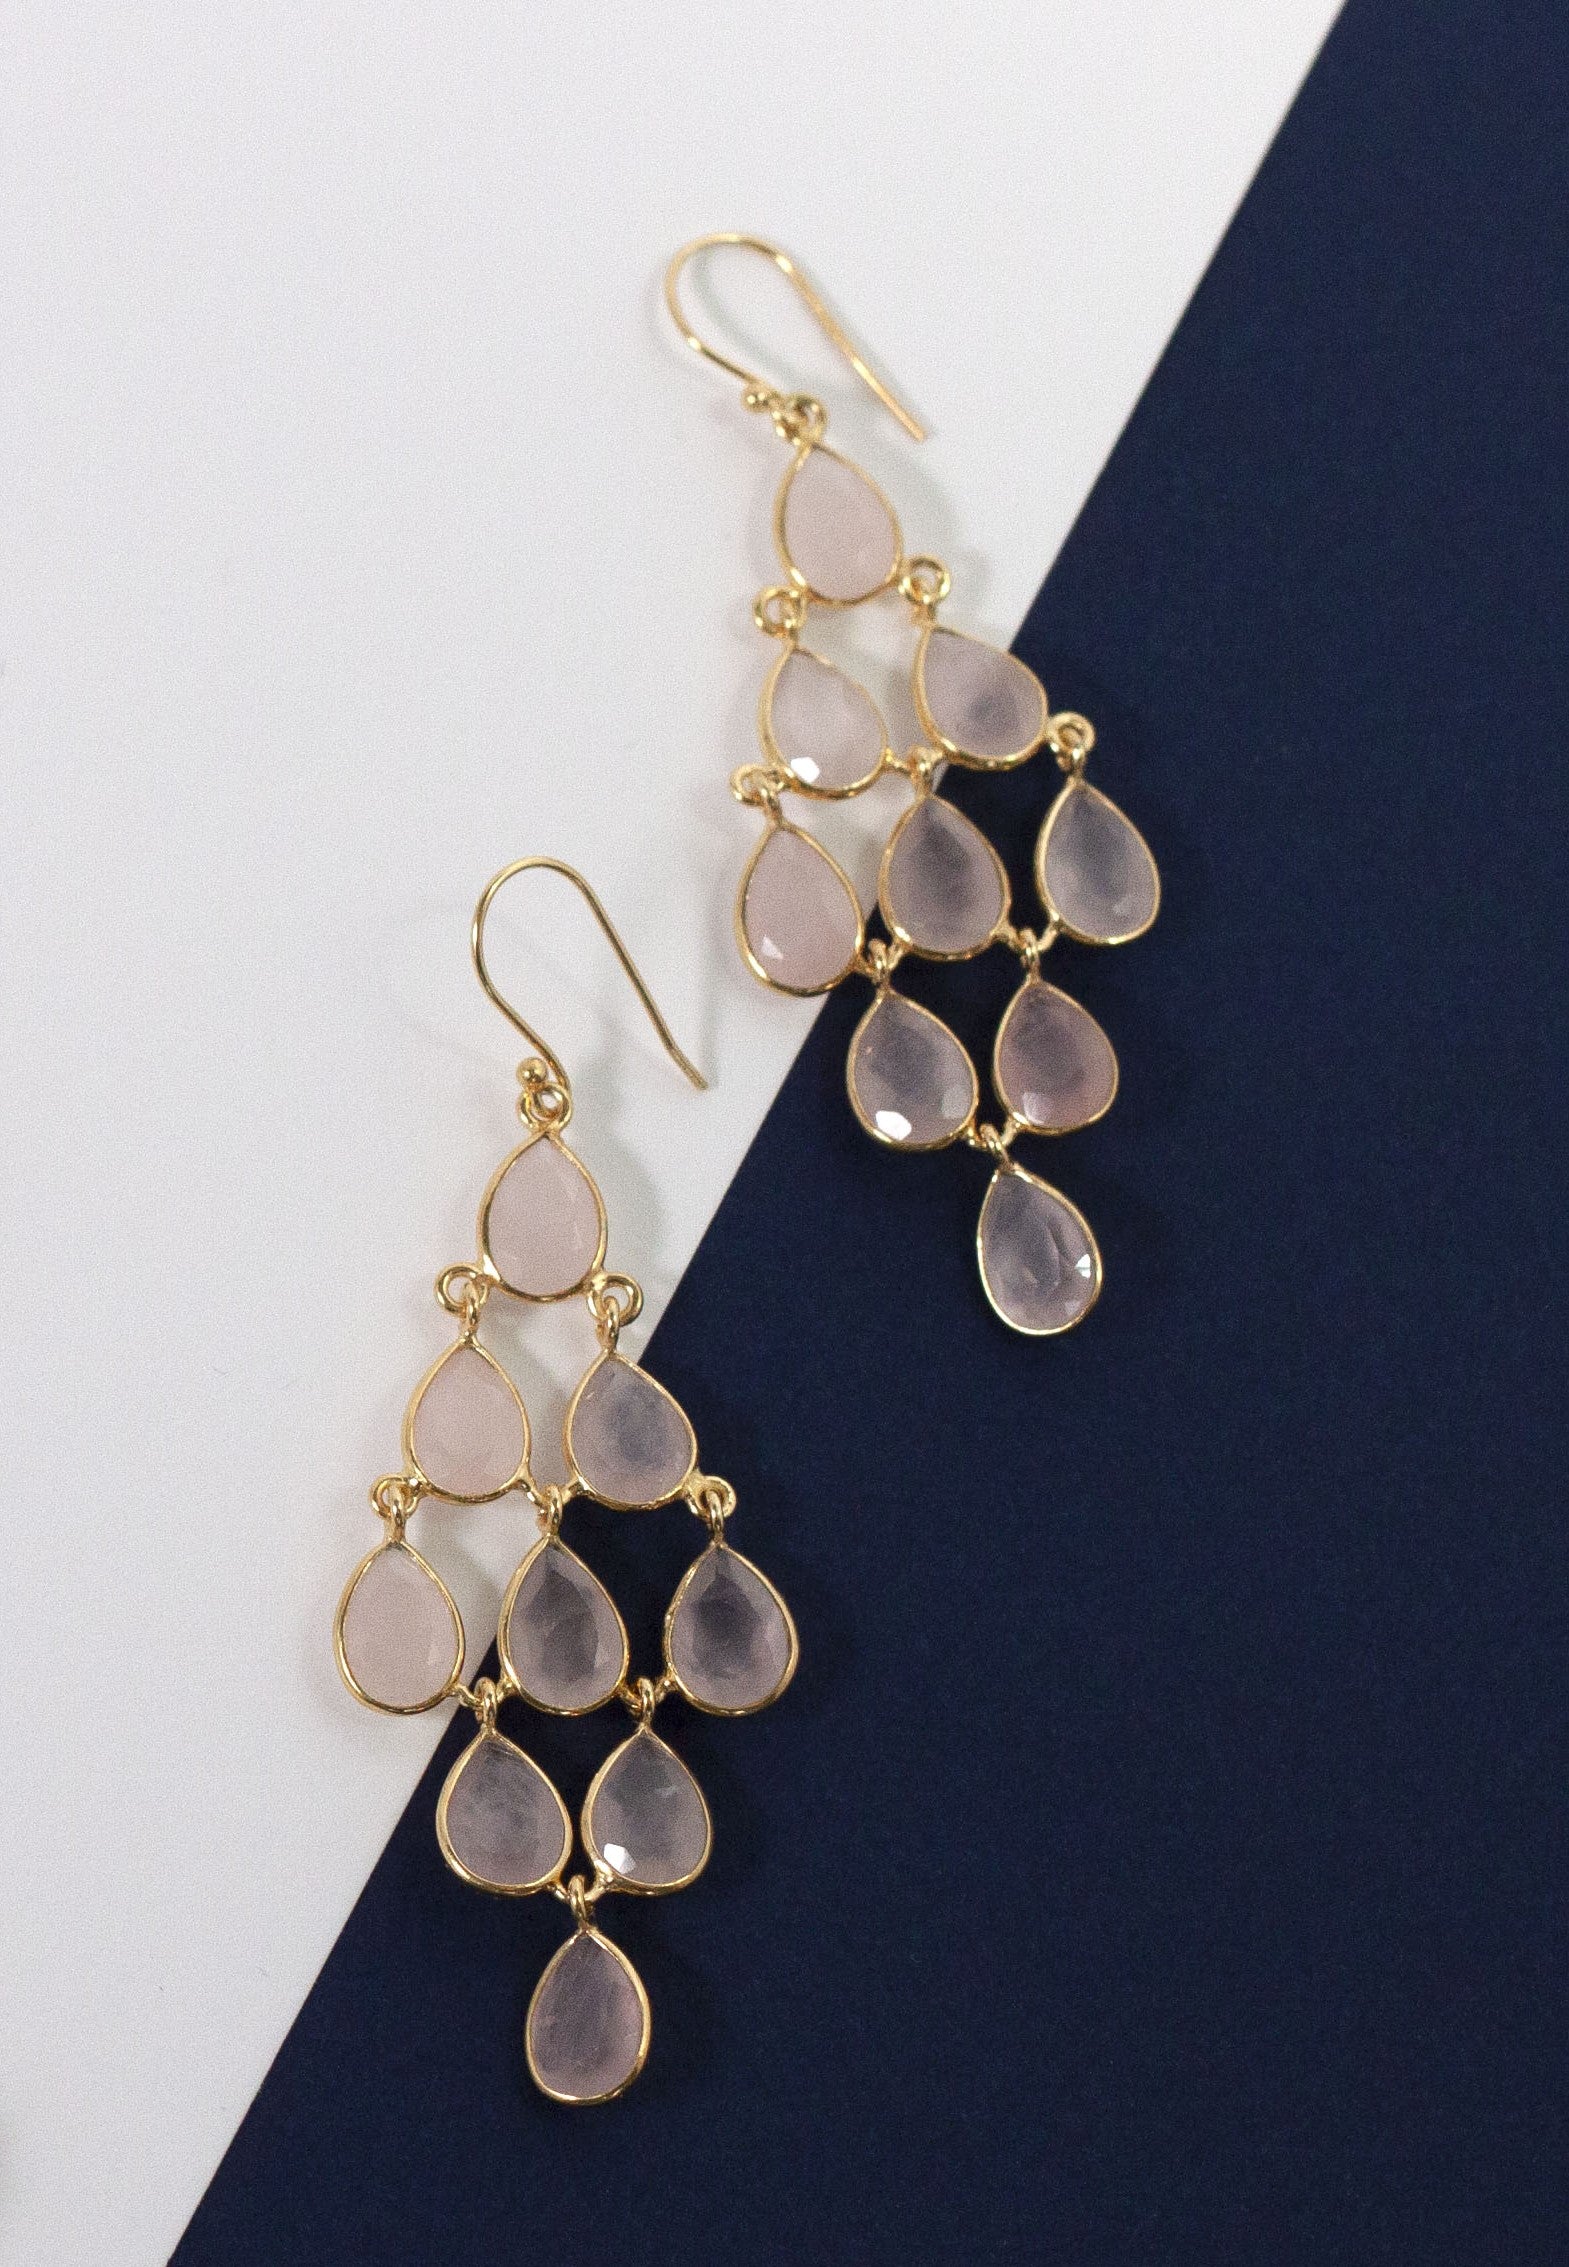 Gold Plated Sterling Silver Chandelier Earrings with Natural Gemstones - Rose Quartz